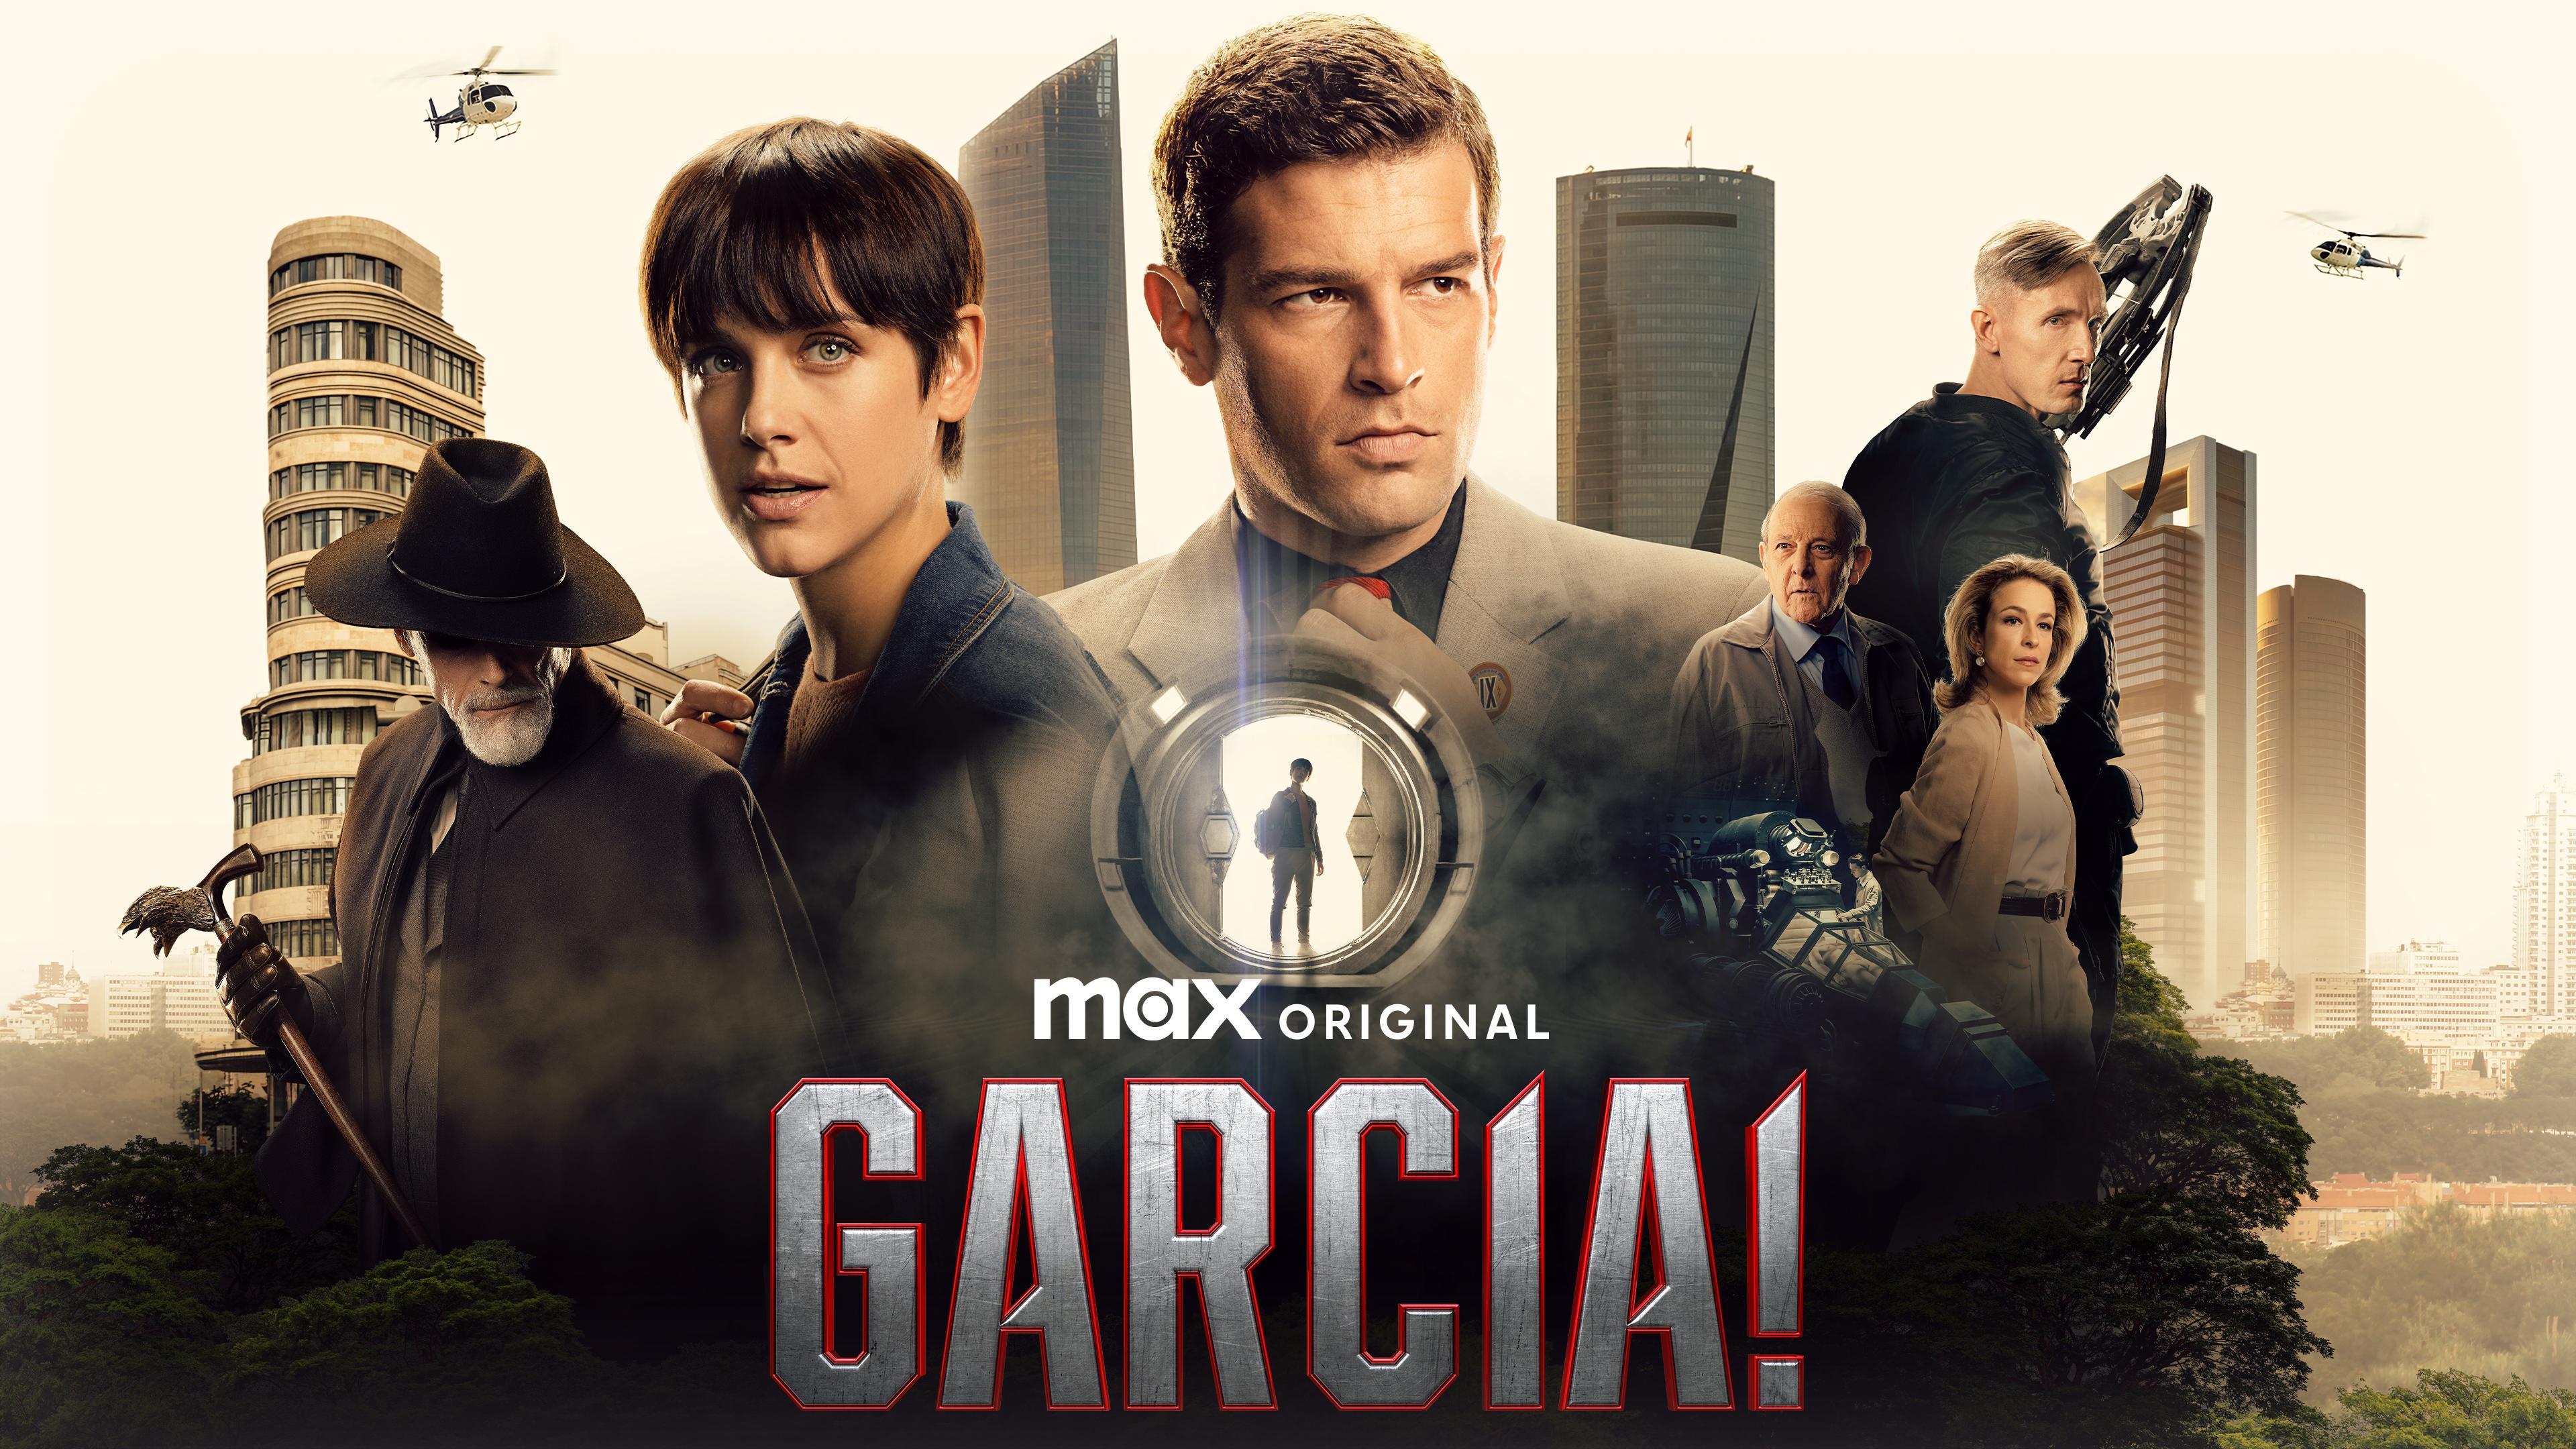 Preview the Max Original Series GARCIA! streaming today with 2 episodes  based on the Graphic Novel by Santiago Garcia, Luis Bustos #HBOMax  #WarnerBrosDiscovery #Trailer